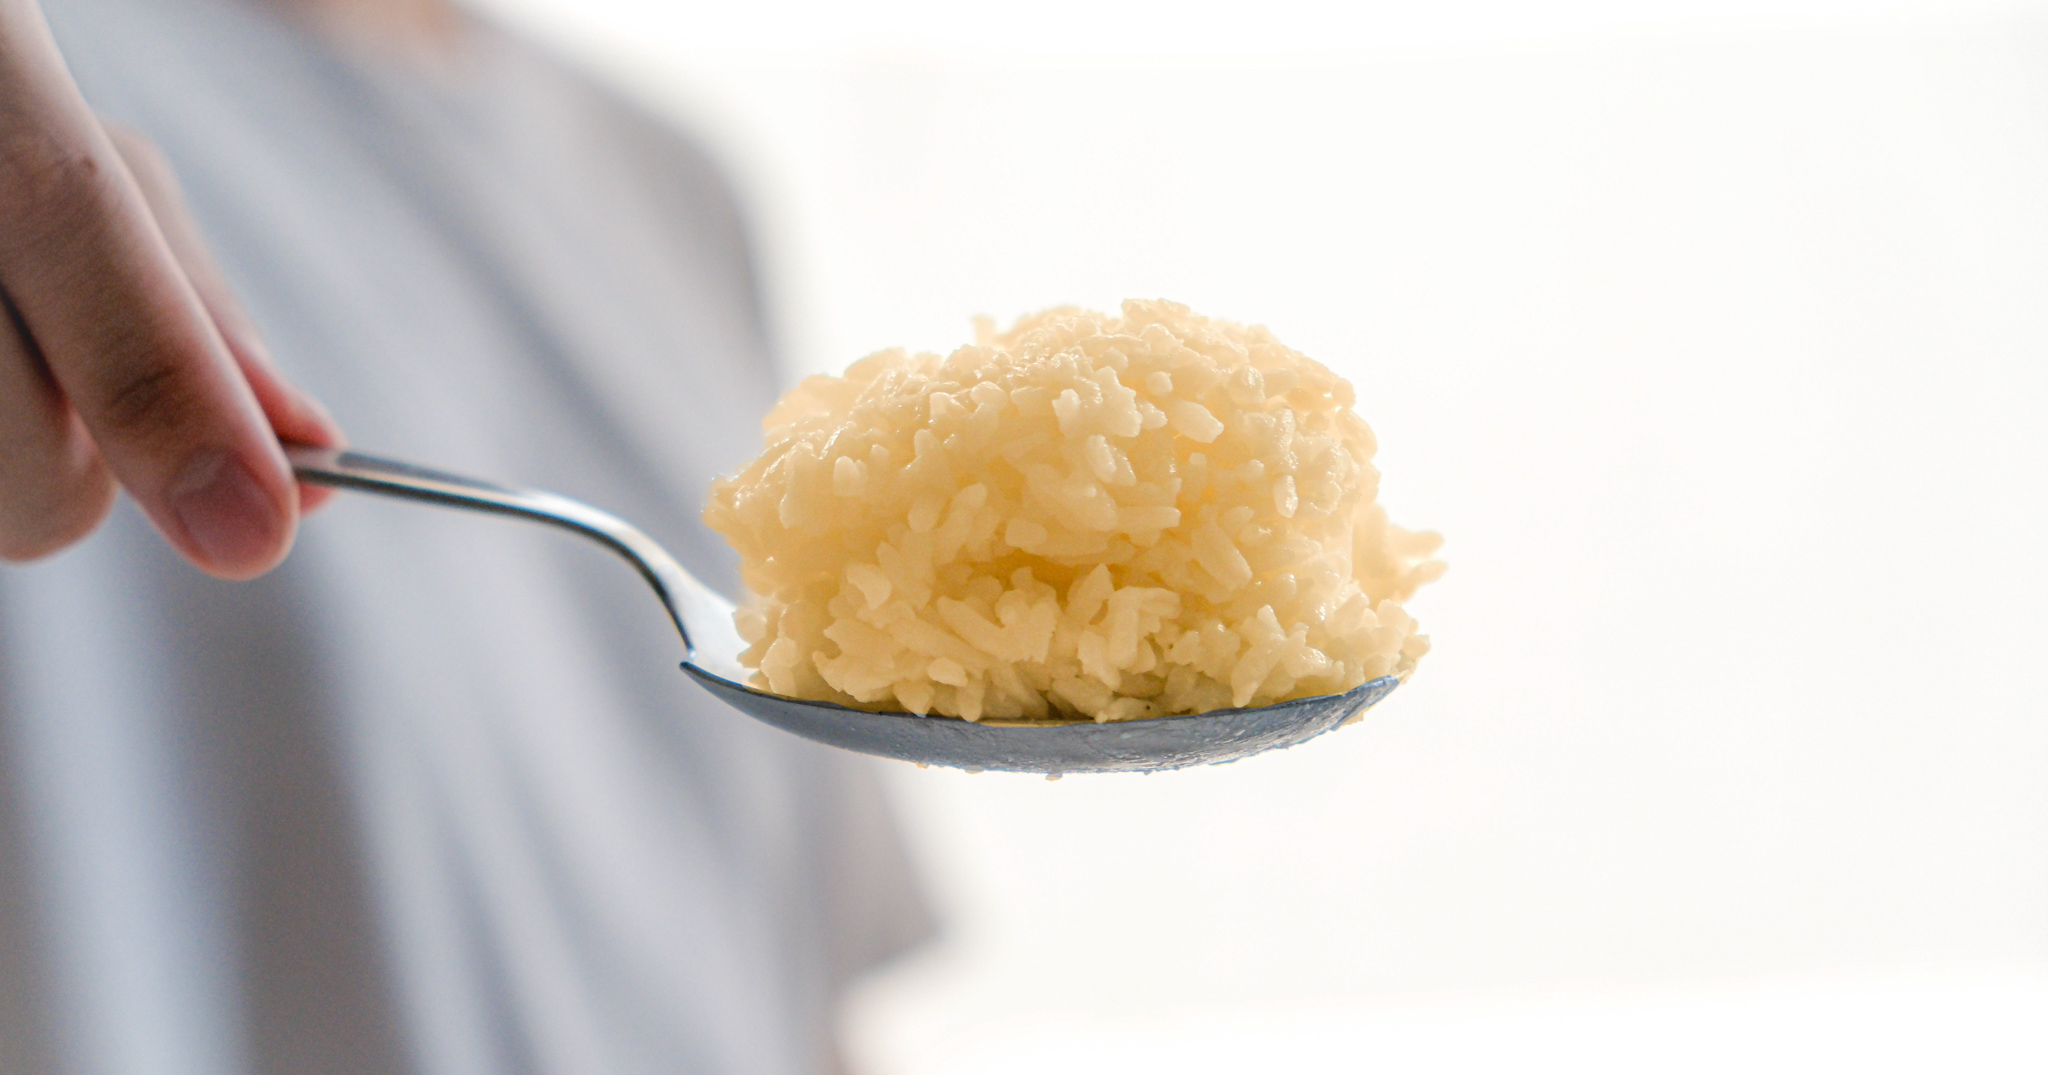 Treatise: We must not give up on Golden Rice